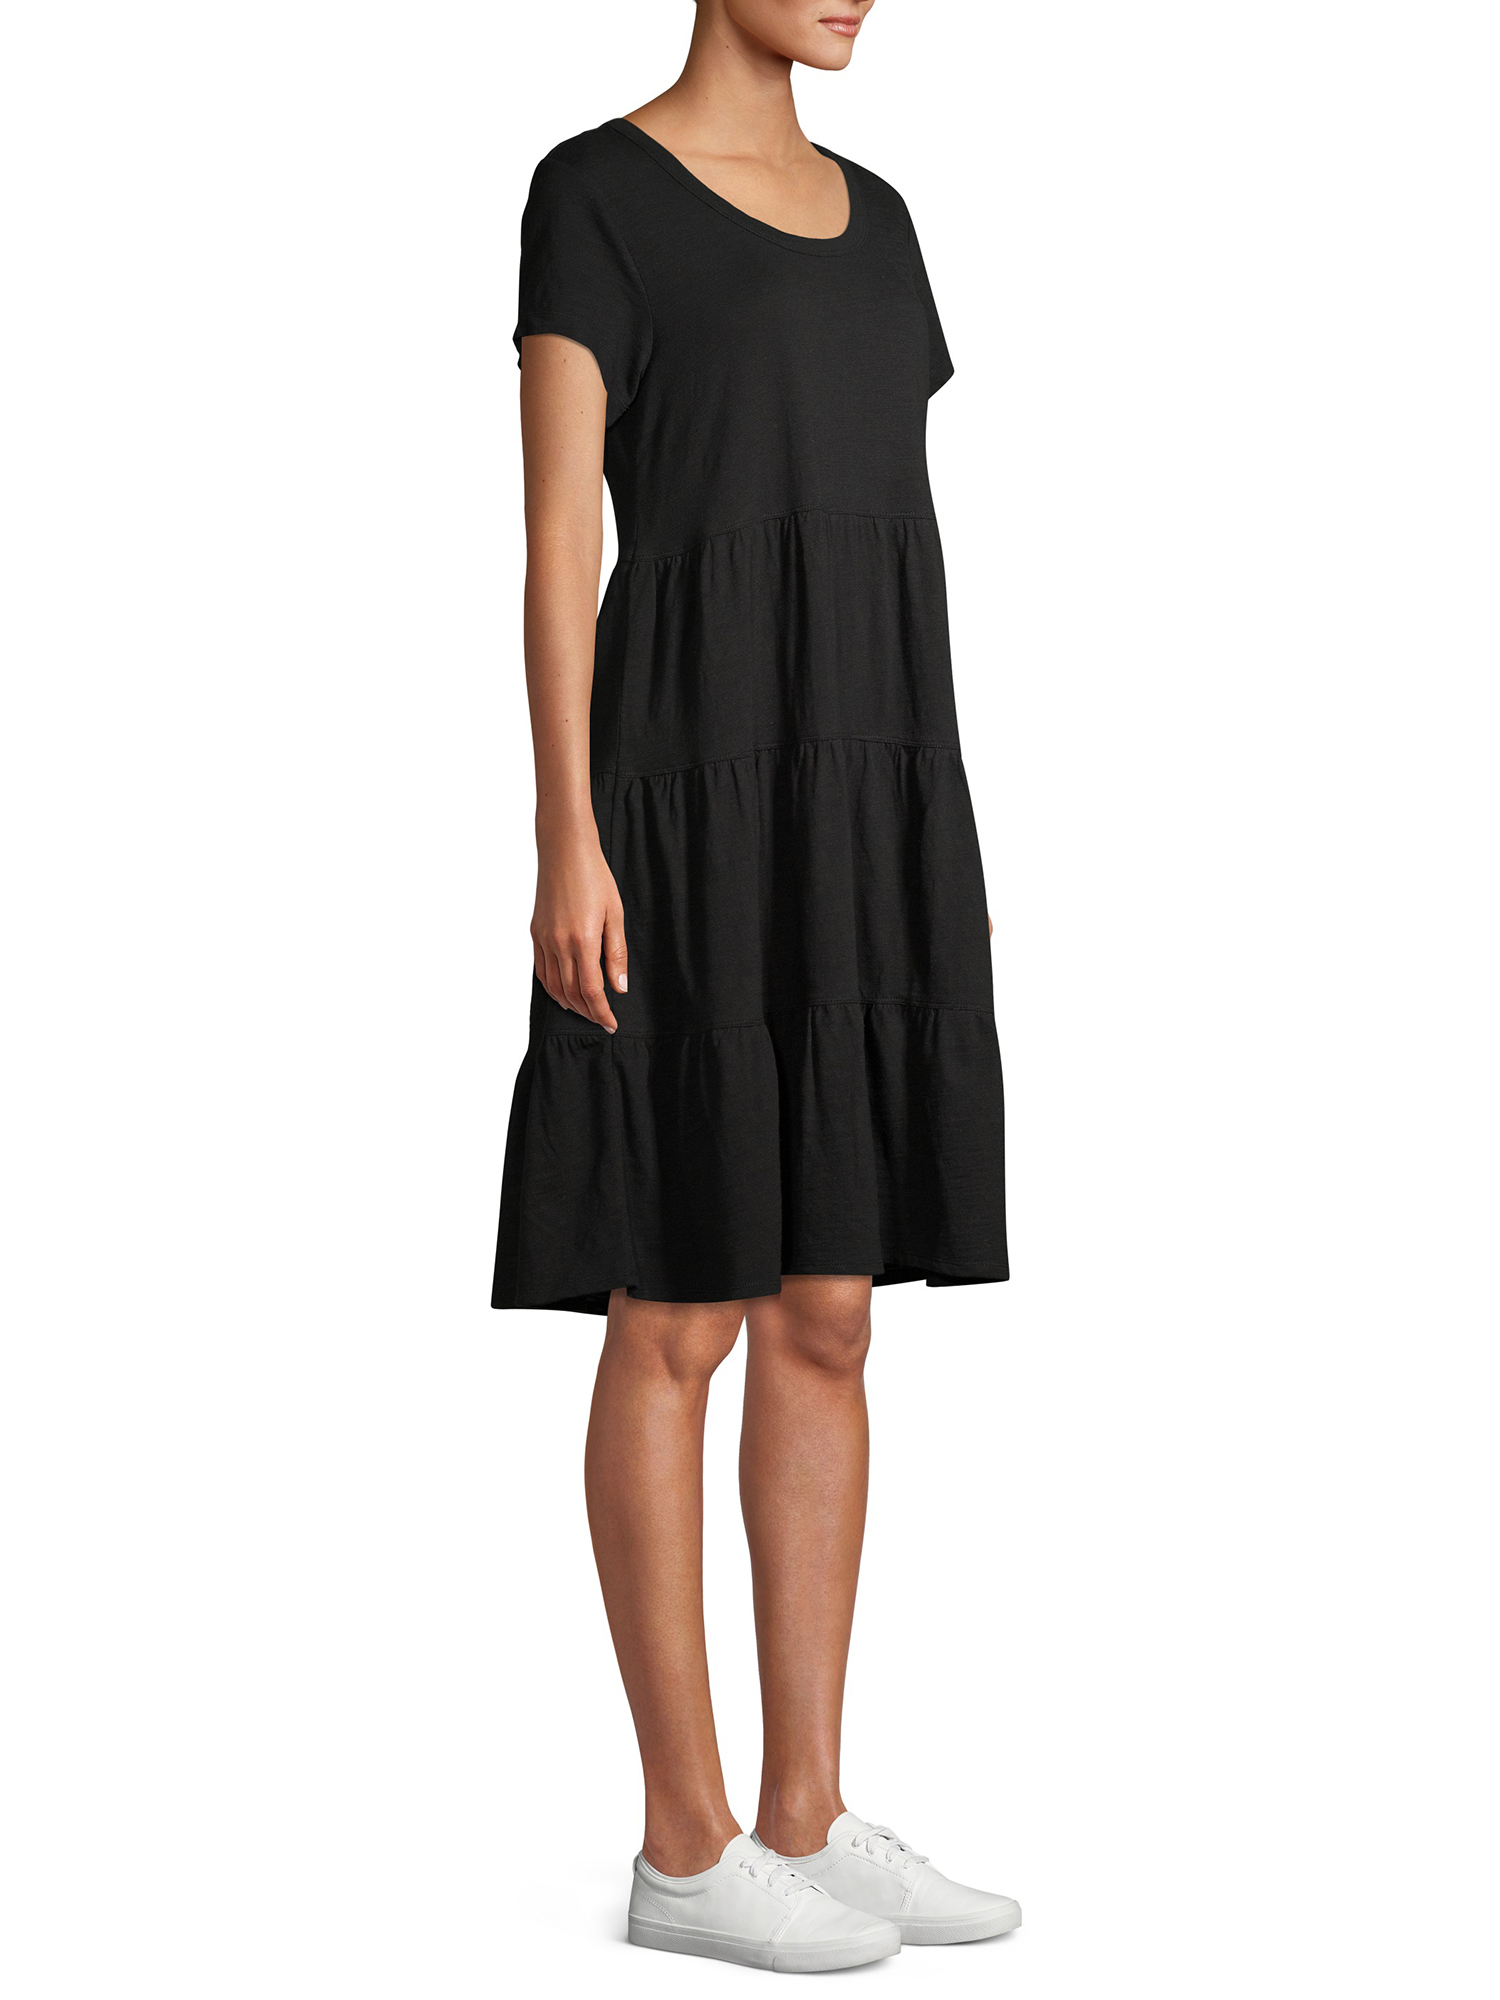 Time and Tru Women's Tiered Knit Dress - image 2 of 6